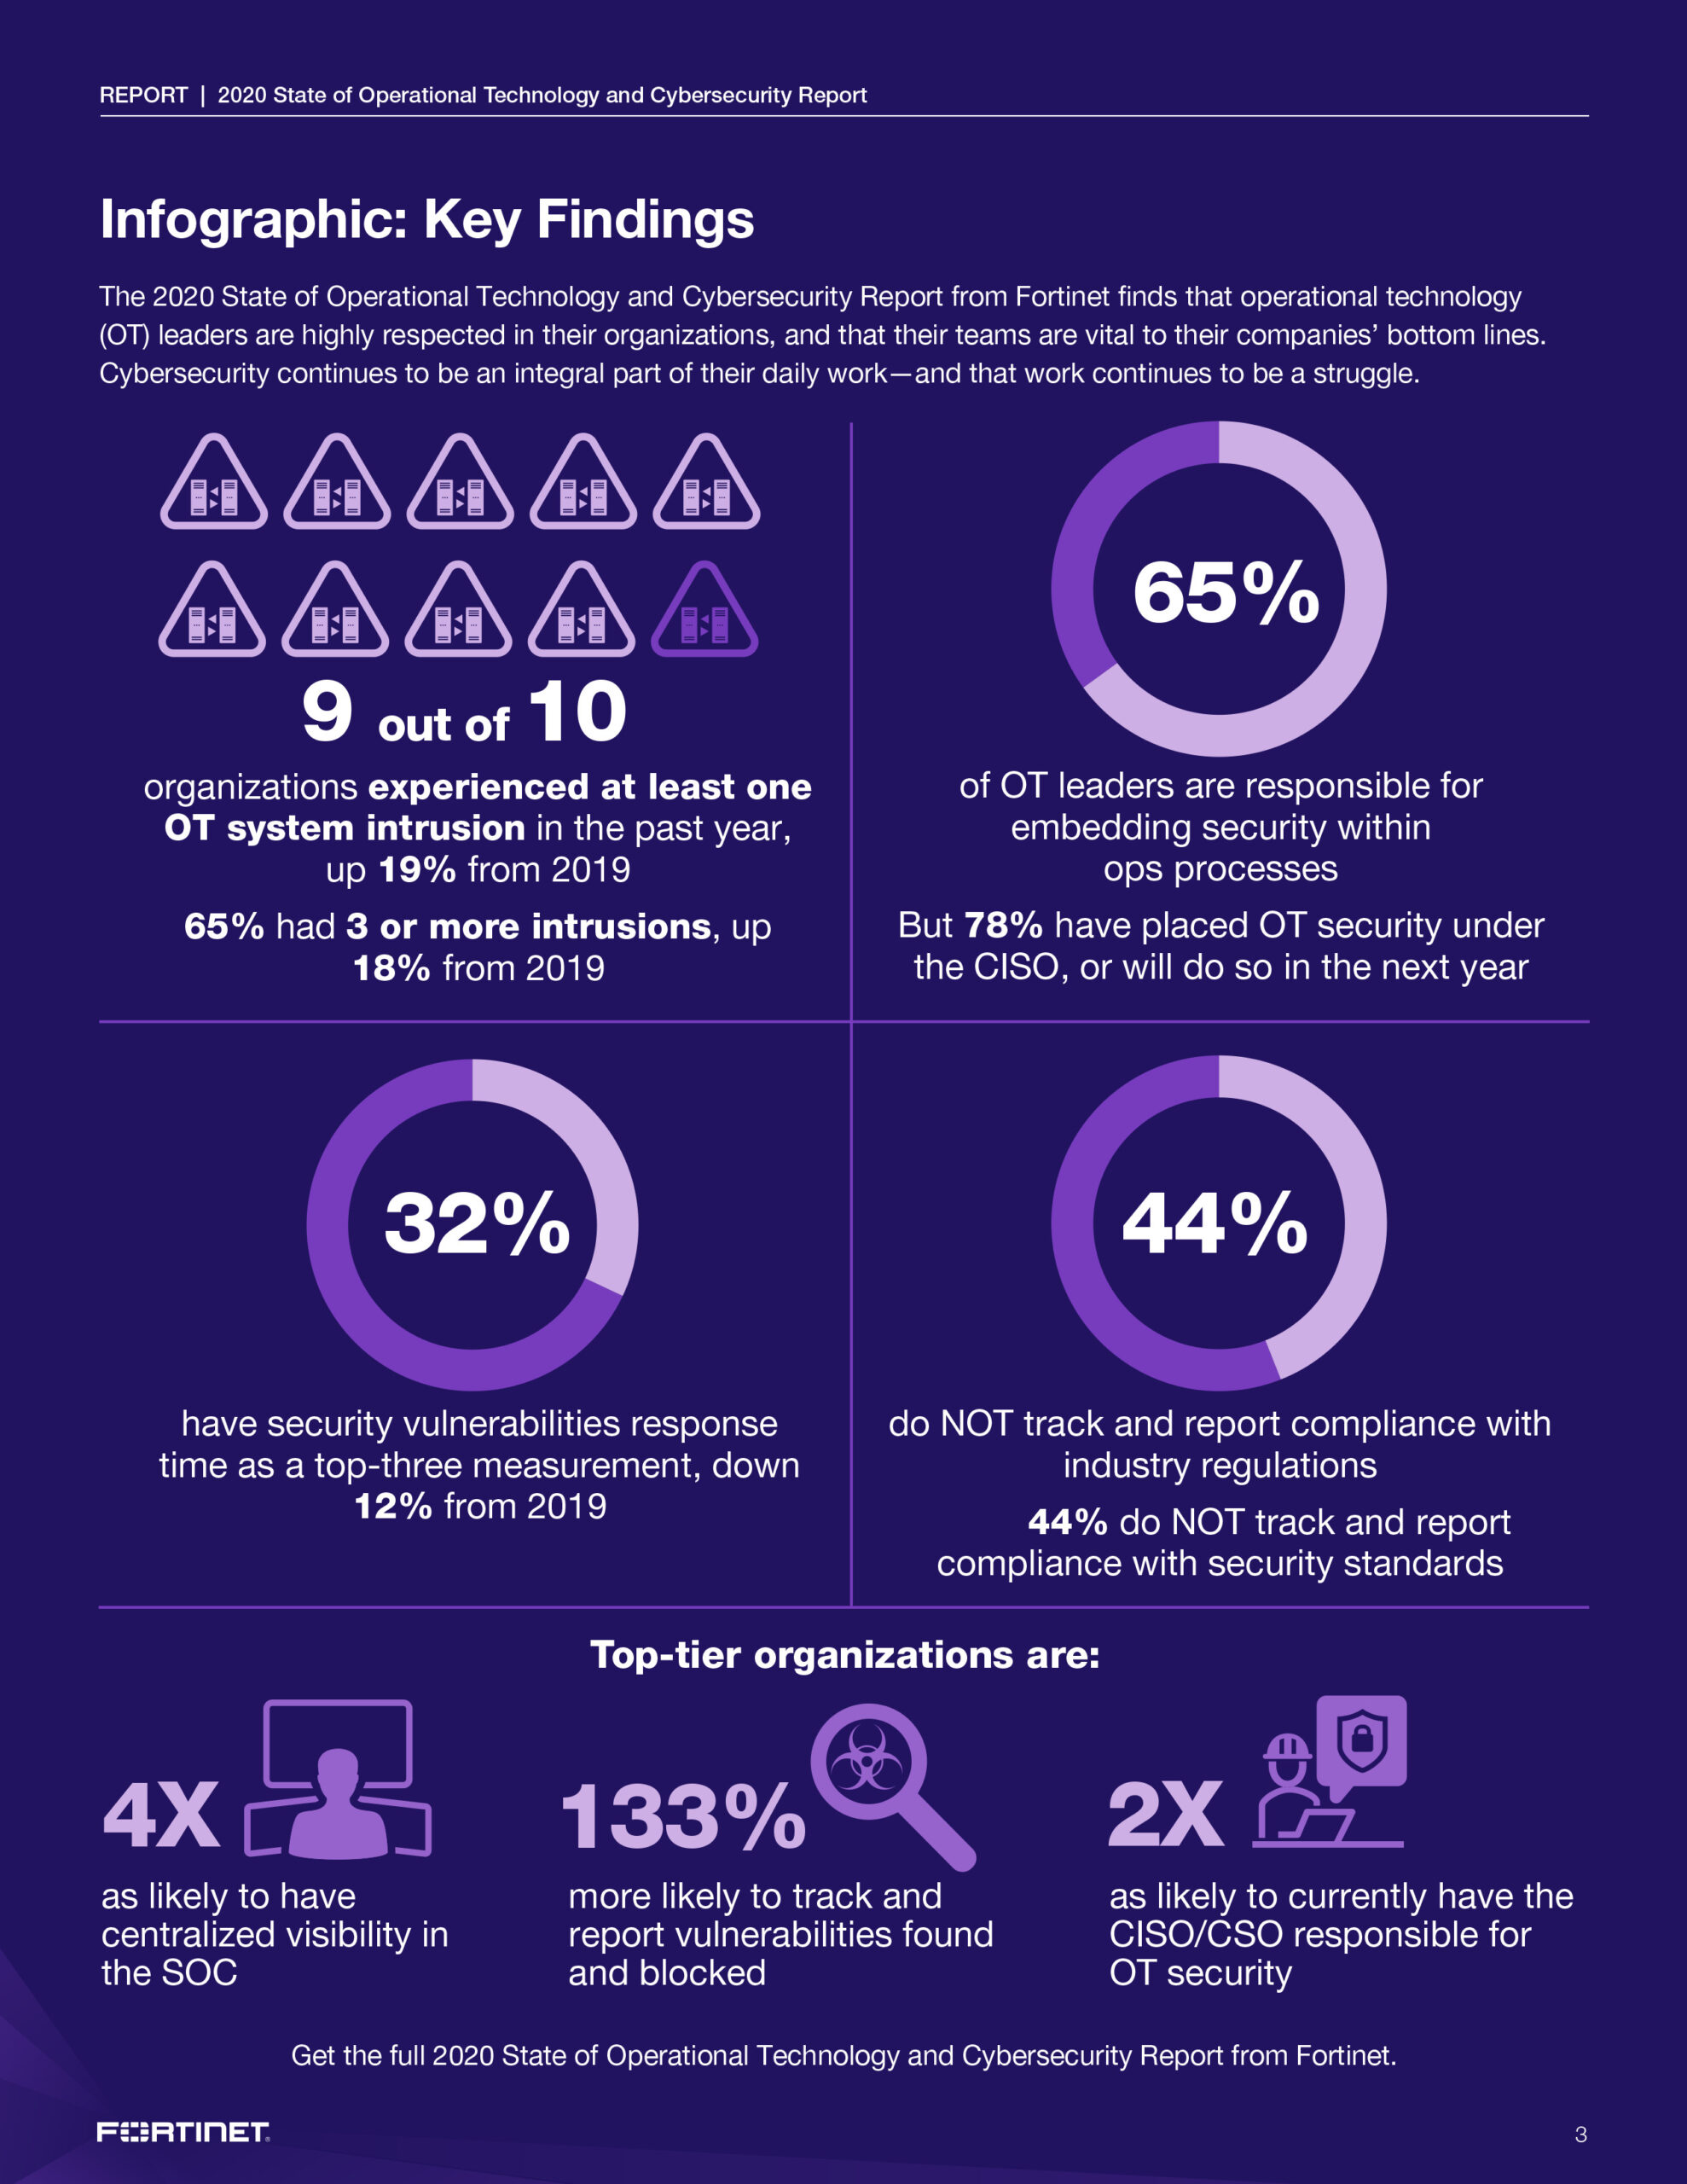 Infograohic Fortinet 2020 OT Cybersecurity Report